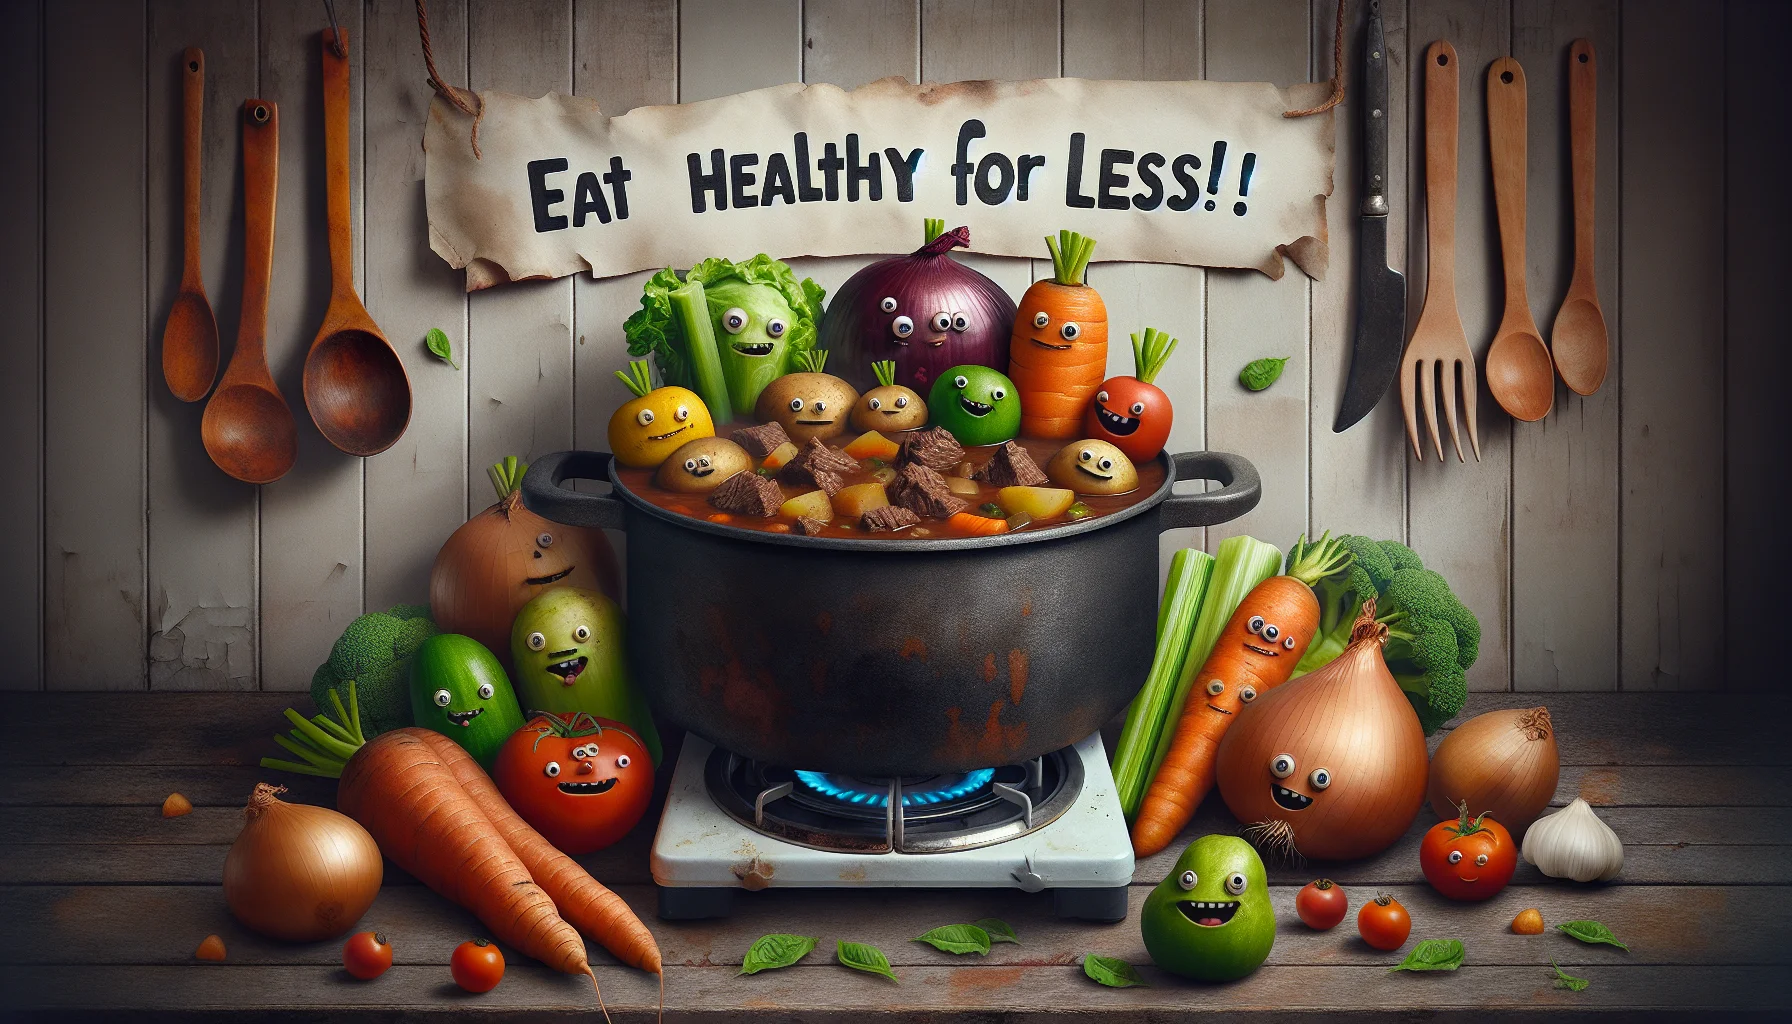 Create an image depicting a comical scenario that promotes budget-friendly and healthy eating. A large cooking pot overflowing with a delicious looking beef stew, which is clearly made without wine, sits on a rustic, well-used stove. Surrounding the pot, a group of various vegetables, such as carrots, potatoes, celery, and onions, are humorously anthropomorphized, showing joyful expressions, as if encouraging the viewer to partake in the tasty, healthful stew. A banner across the top reads, 'Eat Healthy For Less!', underlining the purpose of the scene.